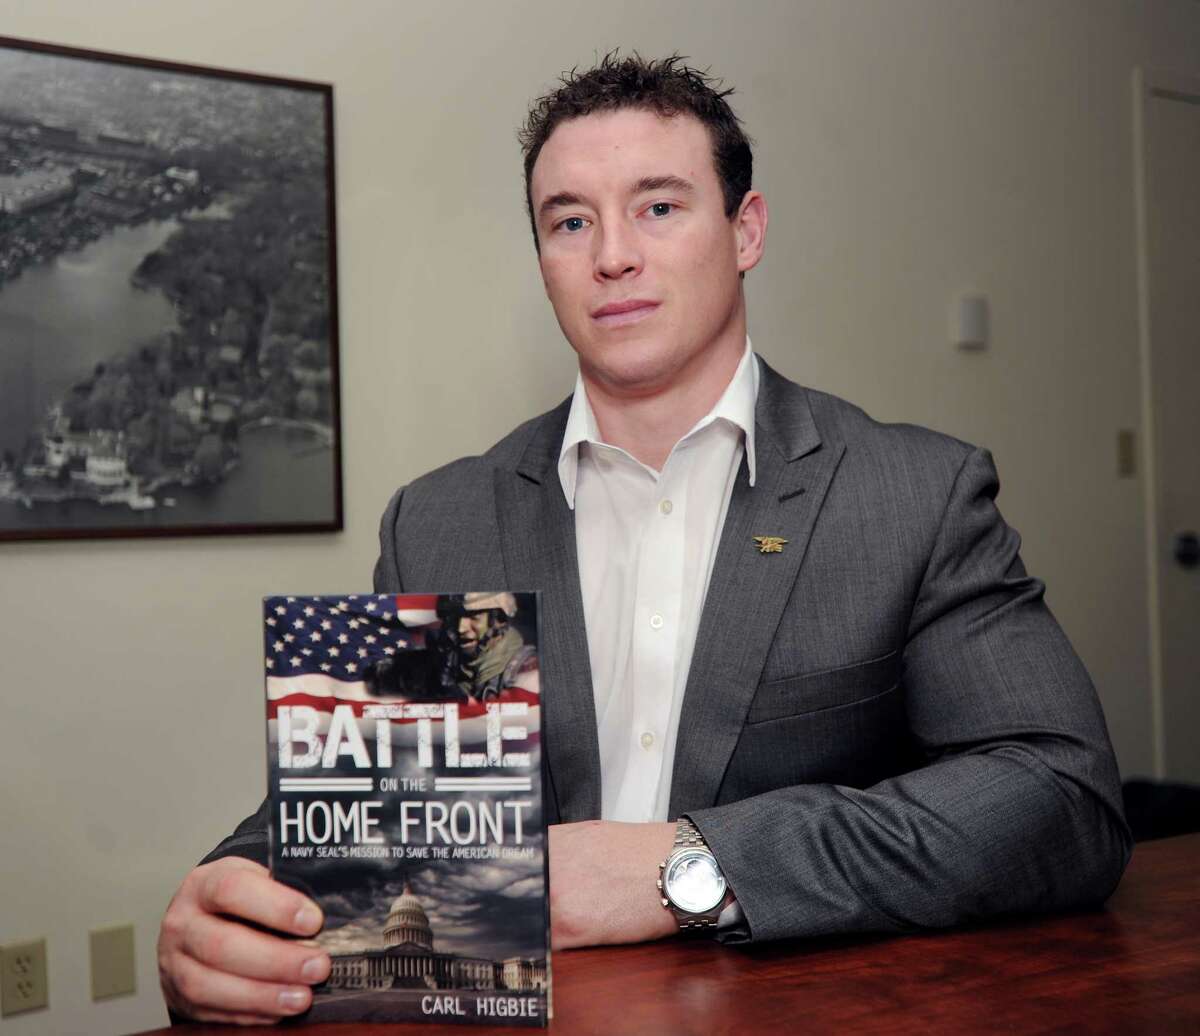 Holding his book "Battle on the Home Front," Carl Higbie, a former Navy SEAL who did two tours of duty in Iraq, at the office of the Greenwich Time, Greenwich, Conn., Tuesday, Jab. 14, 2014. Higbie, a Greenwich resident, is running for Congress in the 4th District as a Republican.